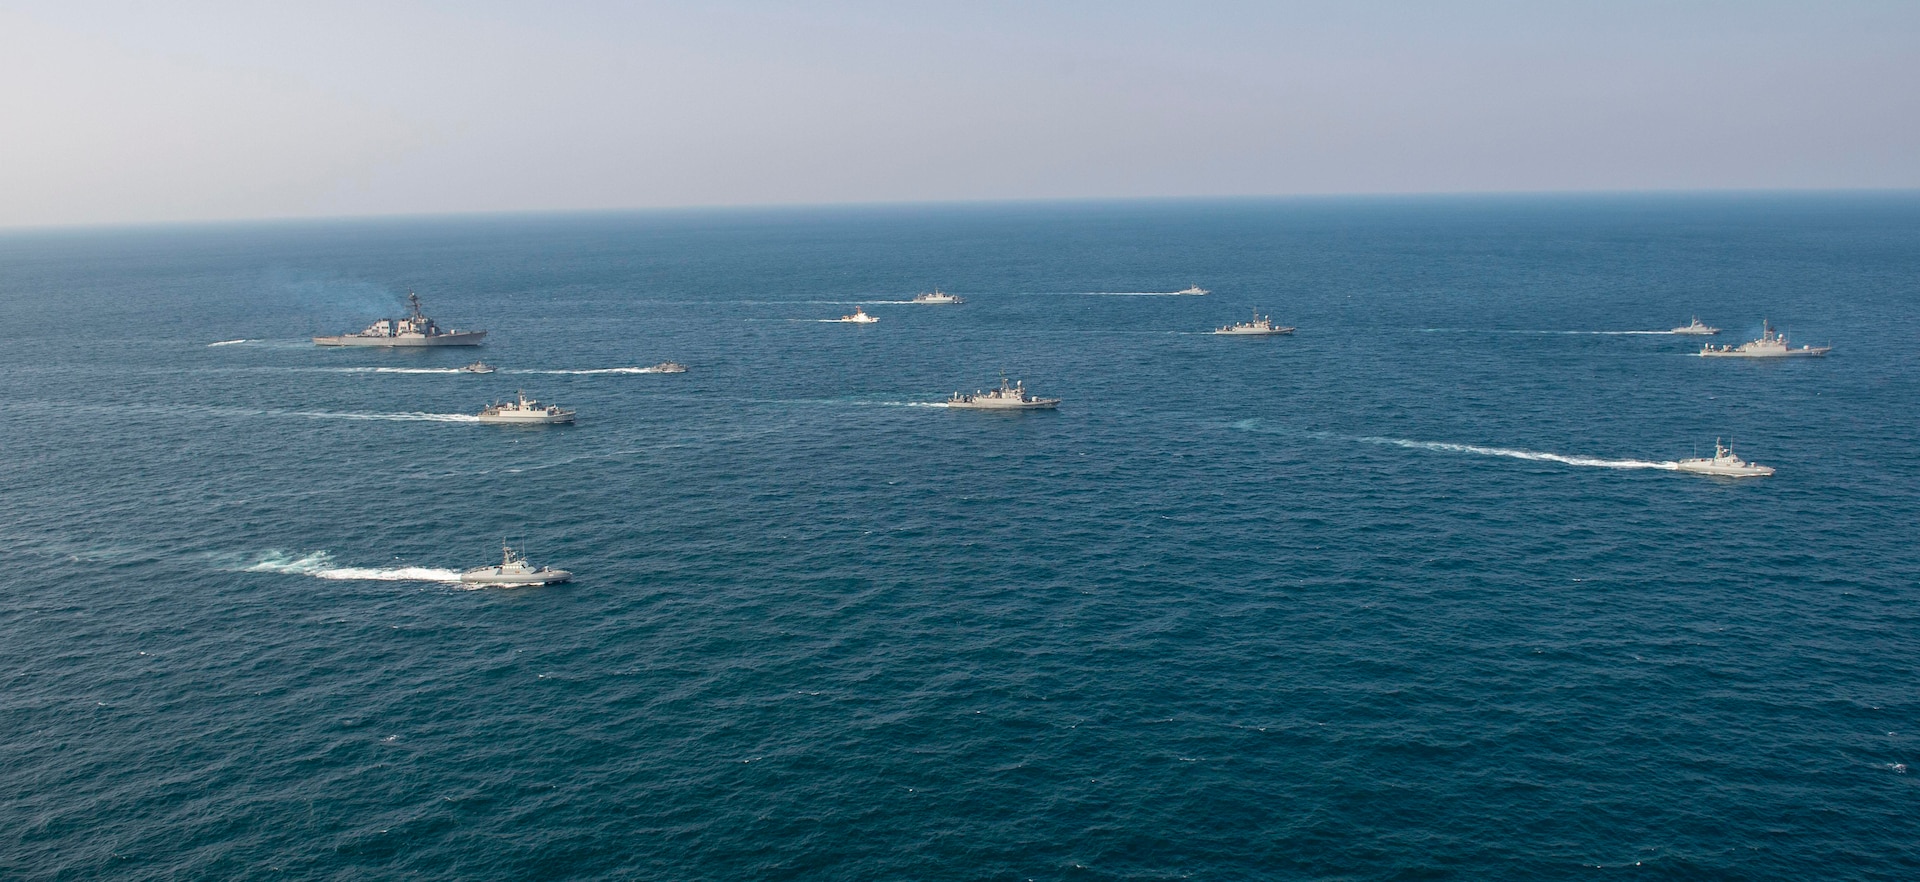 210124-N-XG173-1567 ARABIAN GULF (Jan. 24, 2020) Royal Saudi Naval Force ships and U.S. Navy sail in formation during exercise Nautical Defender (ND) 21 in the Arabian Gulf, Jan. 24. ND 21 is the capstone in a series of multi-national maritime security exercises designed to broaden levels of cooperation, support long-term regional security, and enhance military-to-military interoperability between the Kingdom of Saudi Arabia, UK and the U.S. (U.S. Navy photo by Mass Communication Specialist 2nd Class Aja Bleu Jackson)